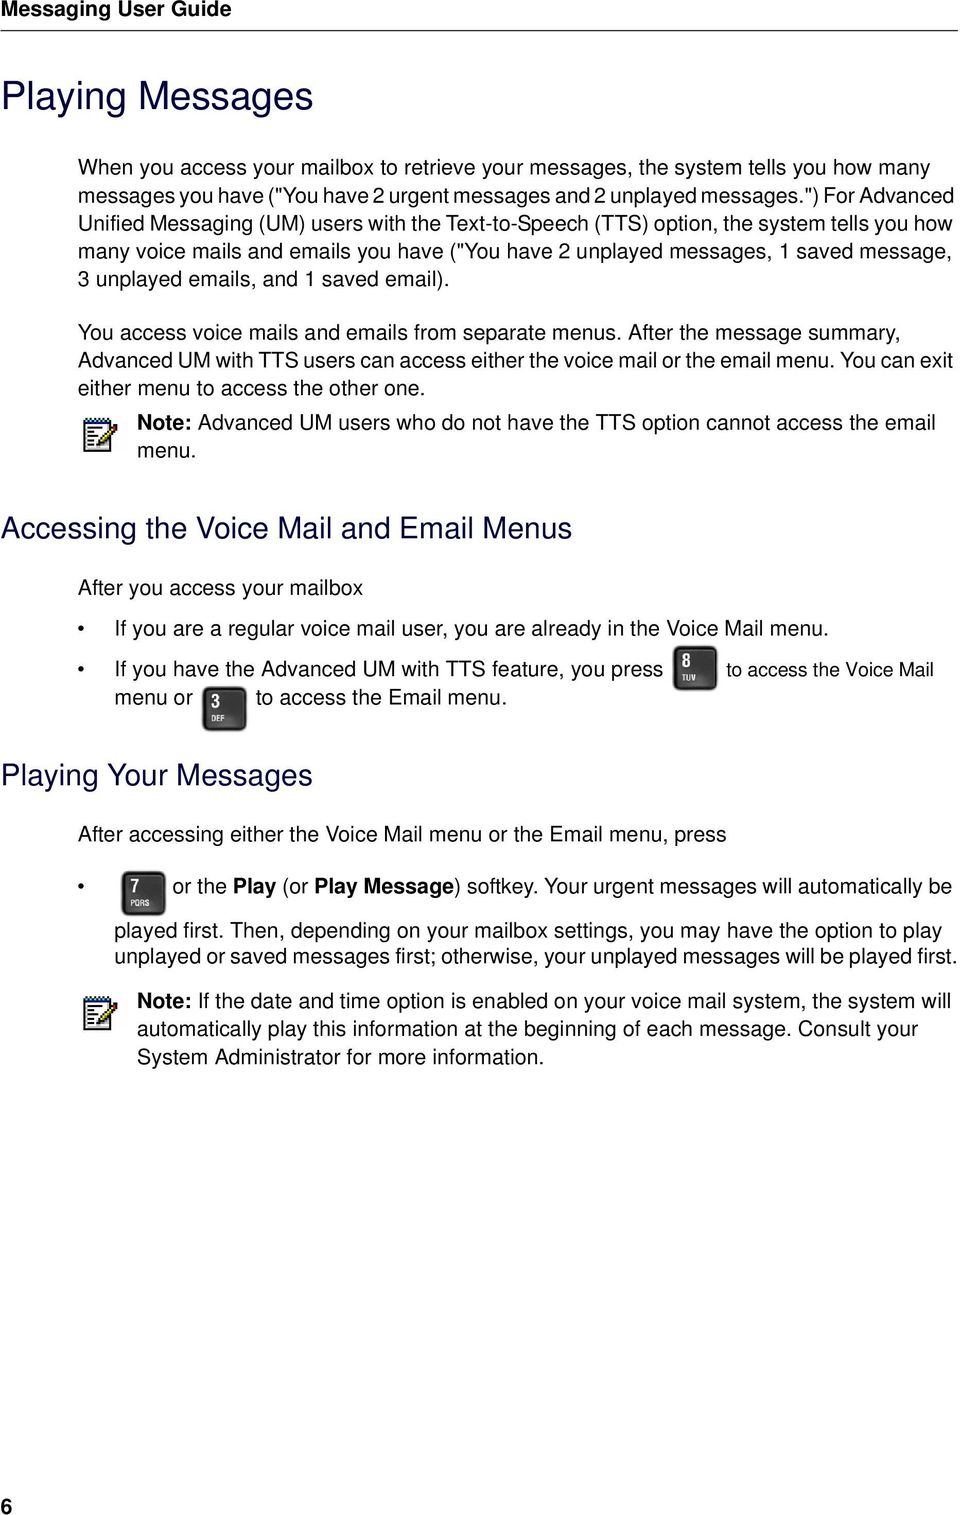 unplayed emails, and 1 saved email). You access voice mails and emails from separate menus. After the message summary, Advanced UM with TTS users can access either the voice mail or the email menu.